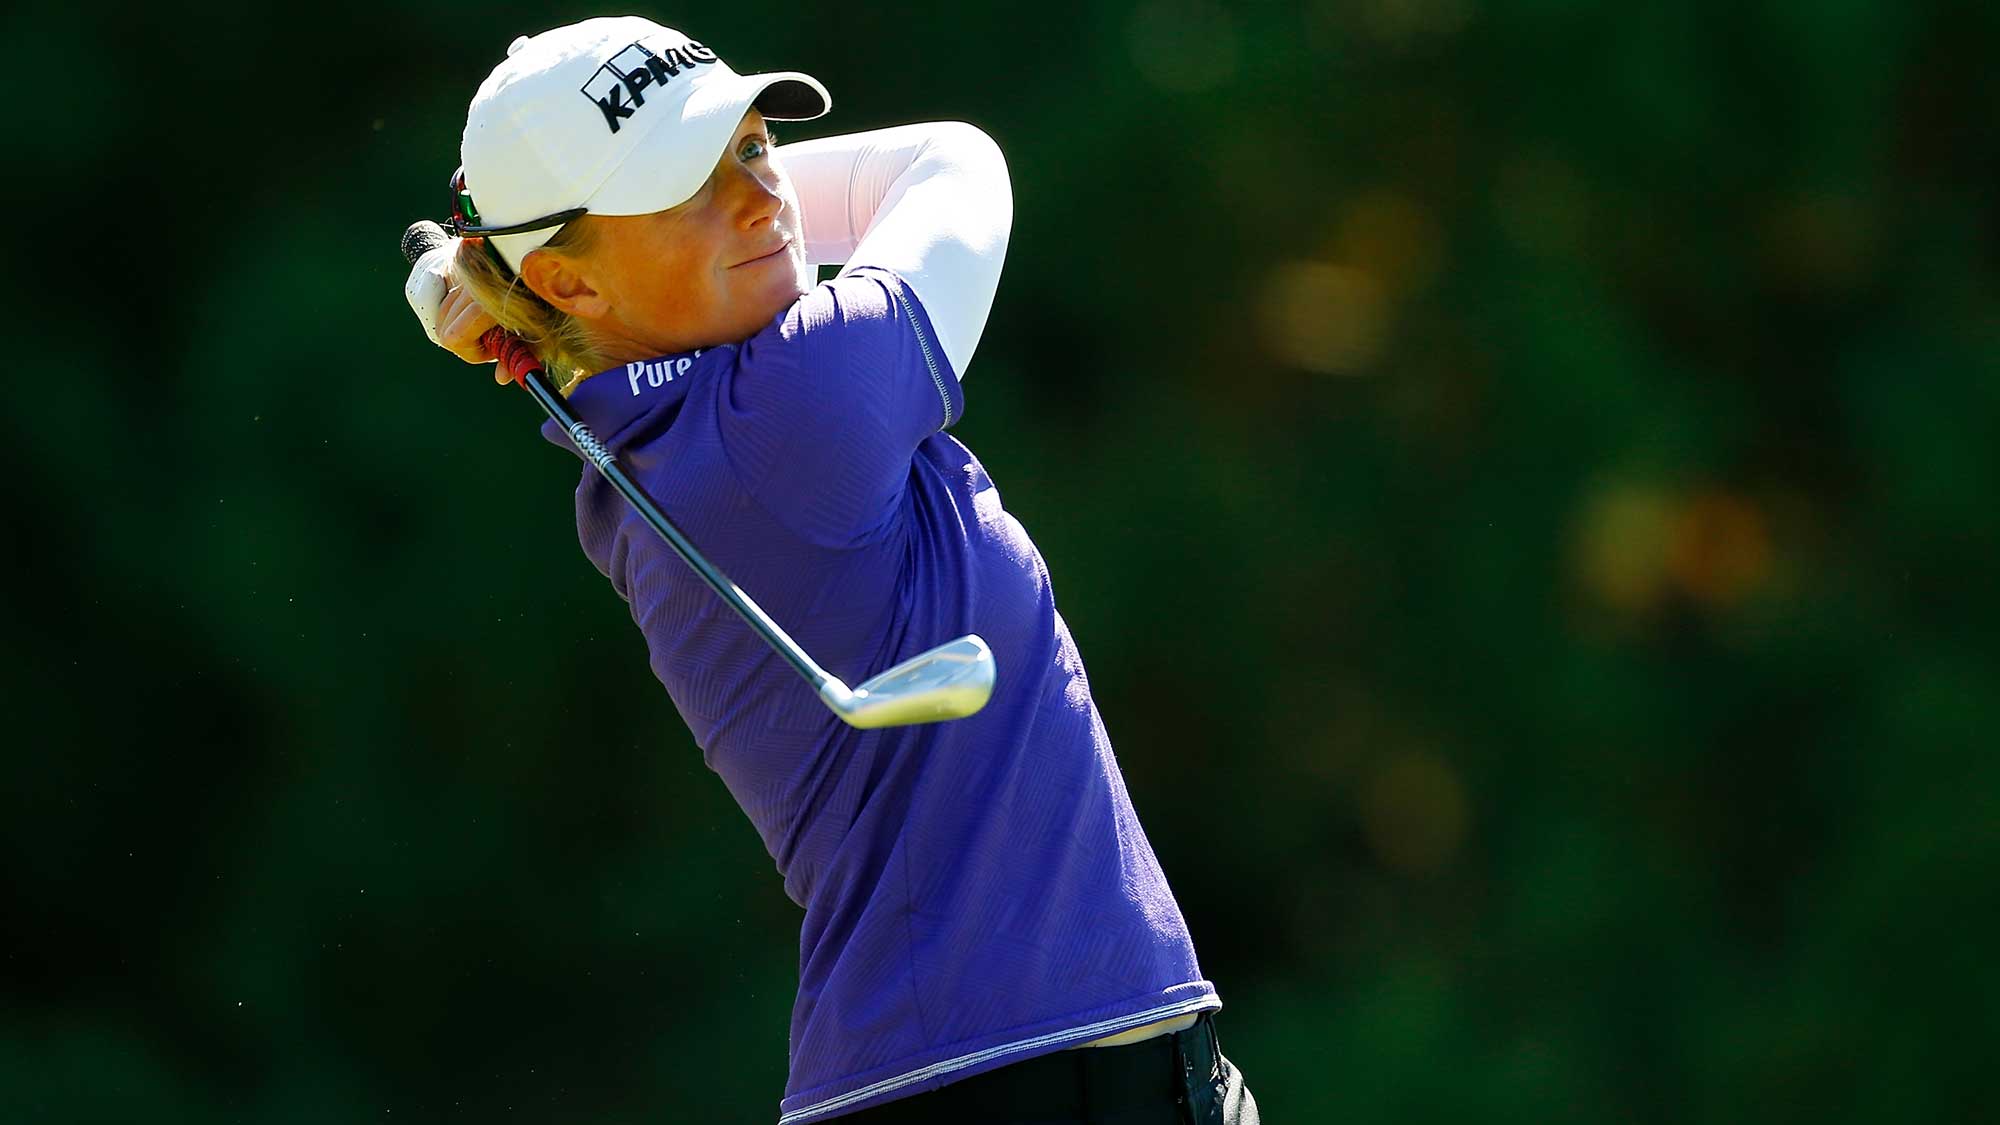 Stacy Lewis tees off on the 2nd hole during the second round of the LPGA Cambia Portland Classic